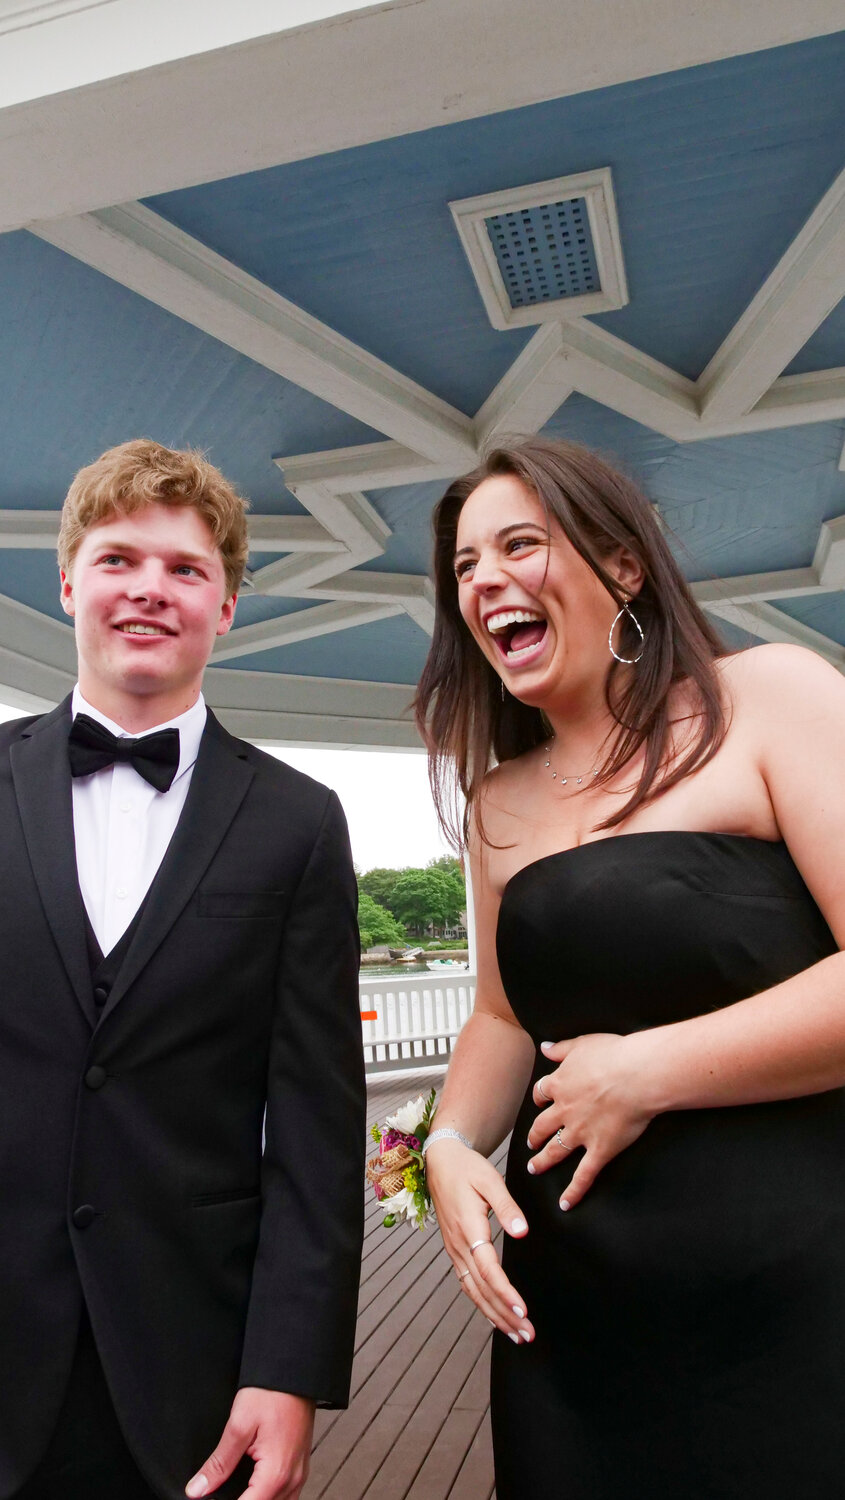 2021 Manchester Essex Regional High School Prom, Pre-Event at Tuck's Point, Manchester-by-the-Sea